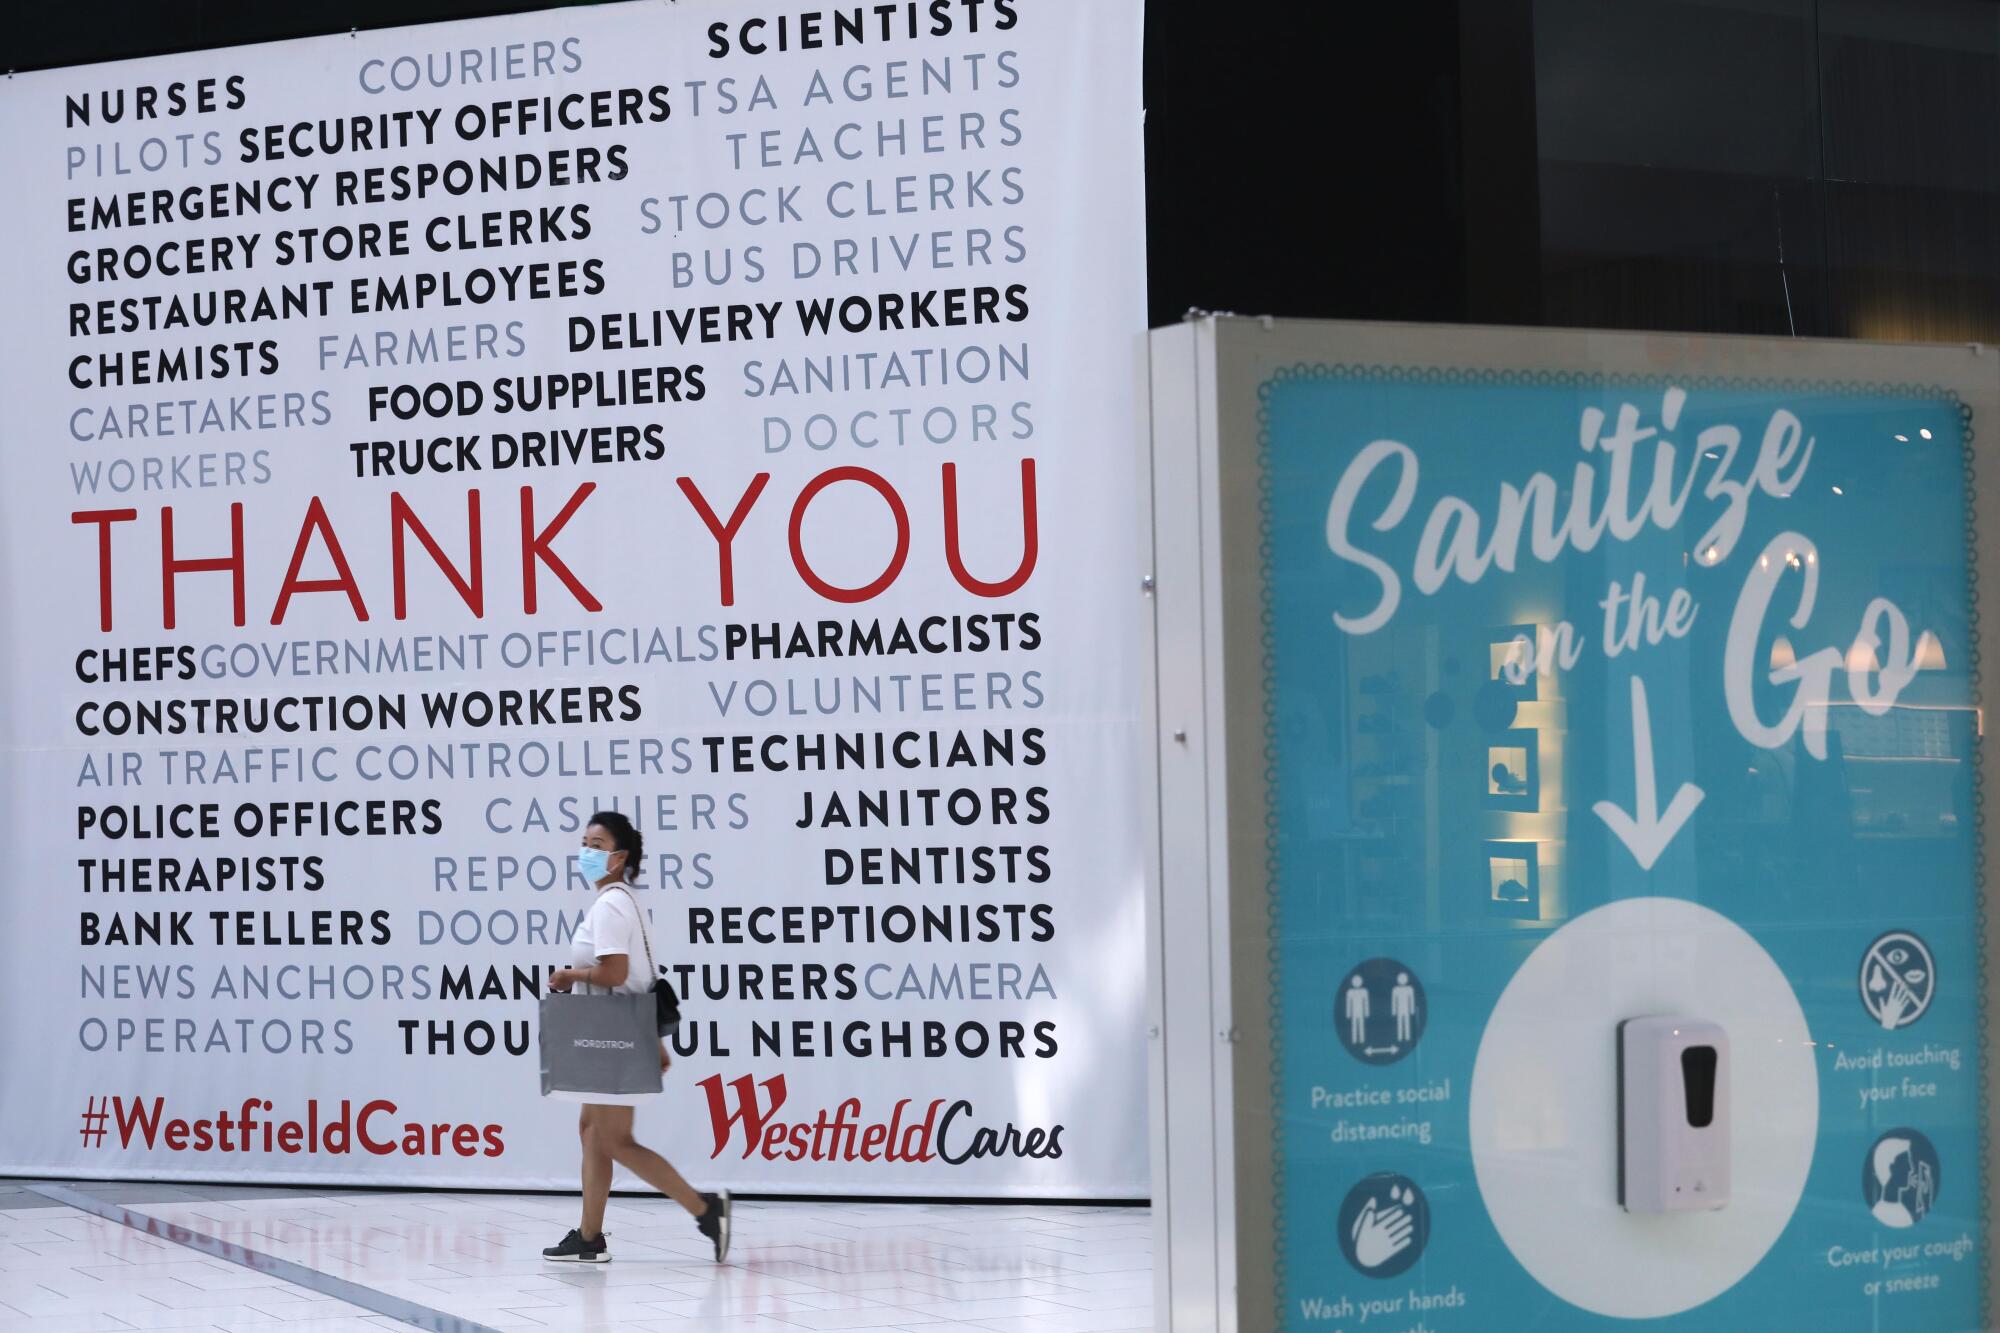 A thank you sign and hand sanitizer station greet shoppers at the Westfield Santa Anita mall.